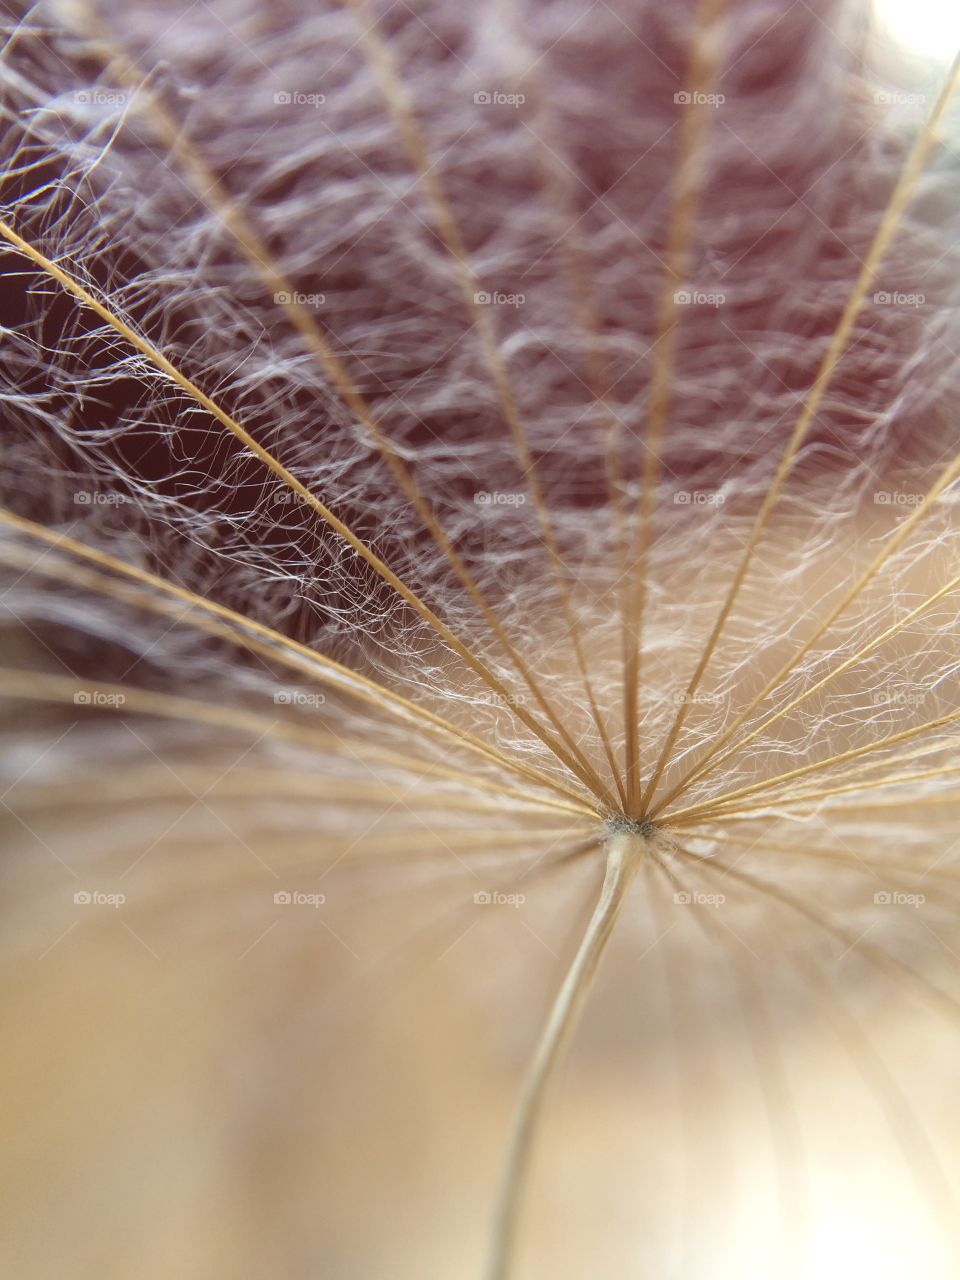 Close up of a seed .. macro mission ... Foap 